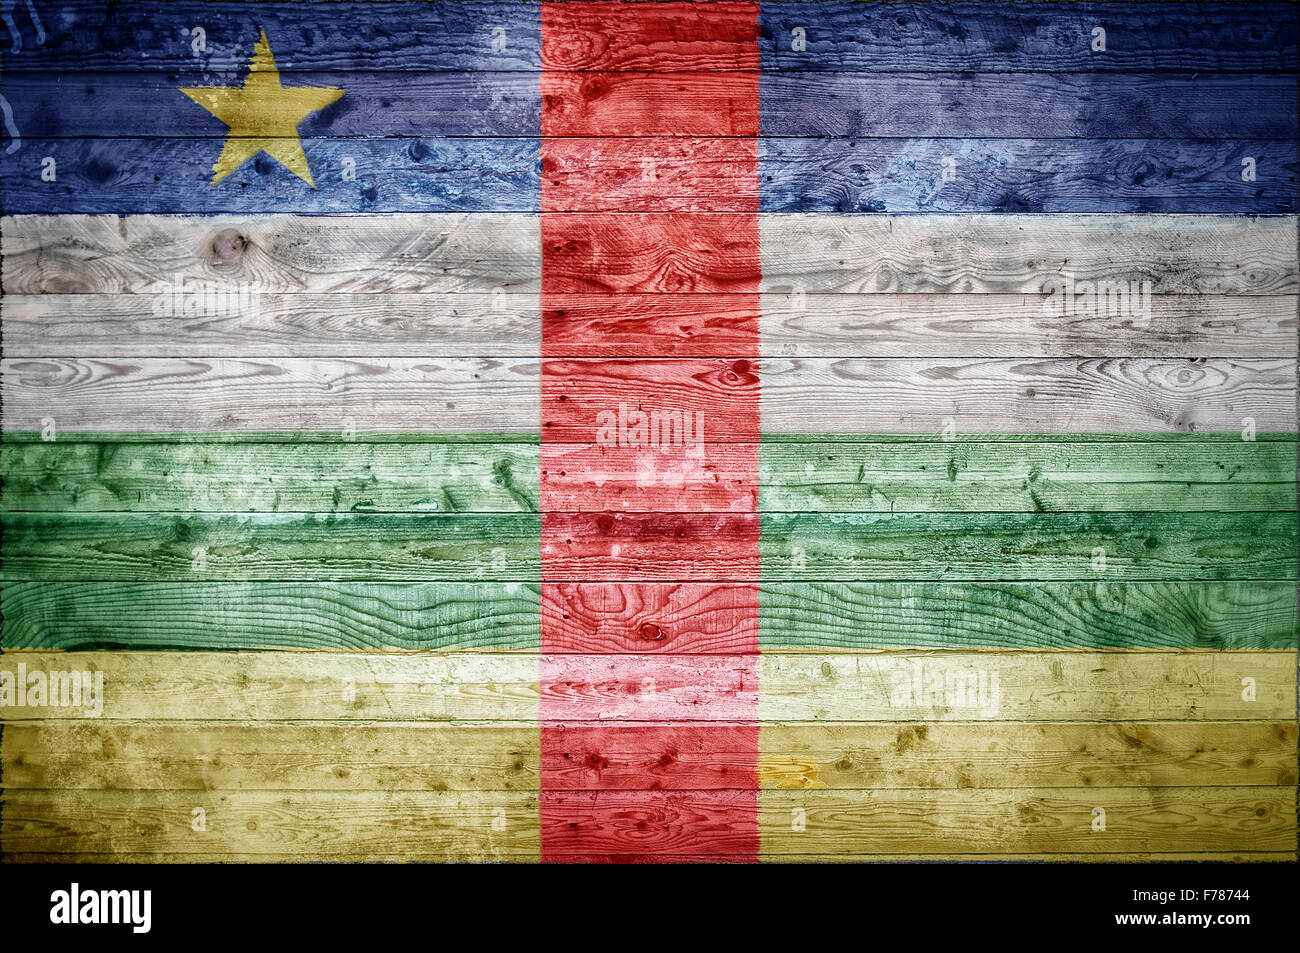 A vignetted background image of the flag of Central African Republic painted onto wooden boards of a wall or floor. Stock Photo